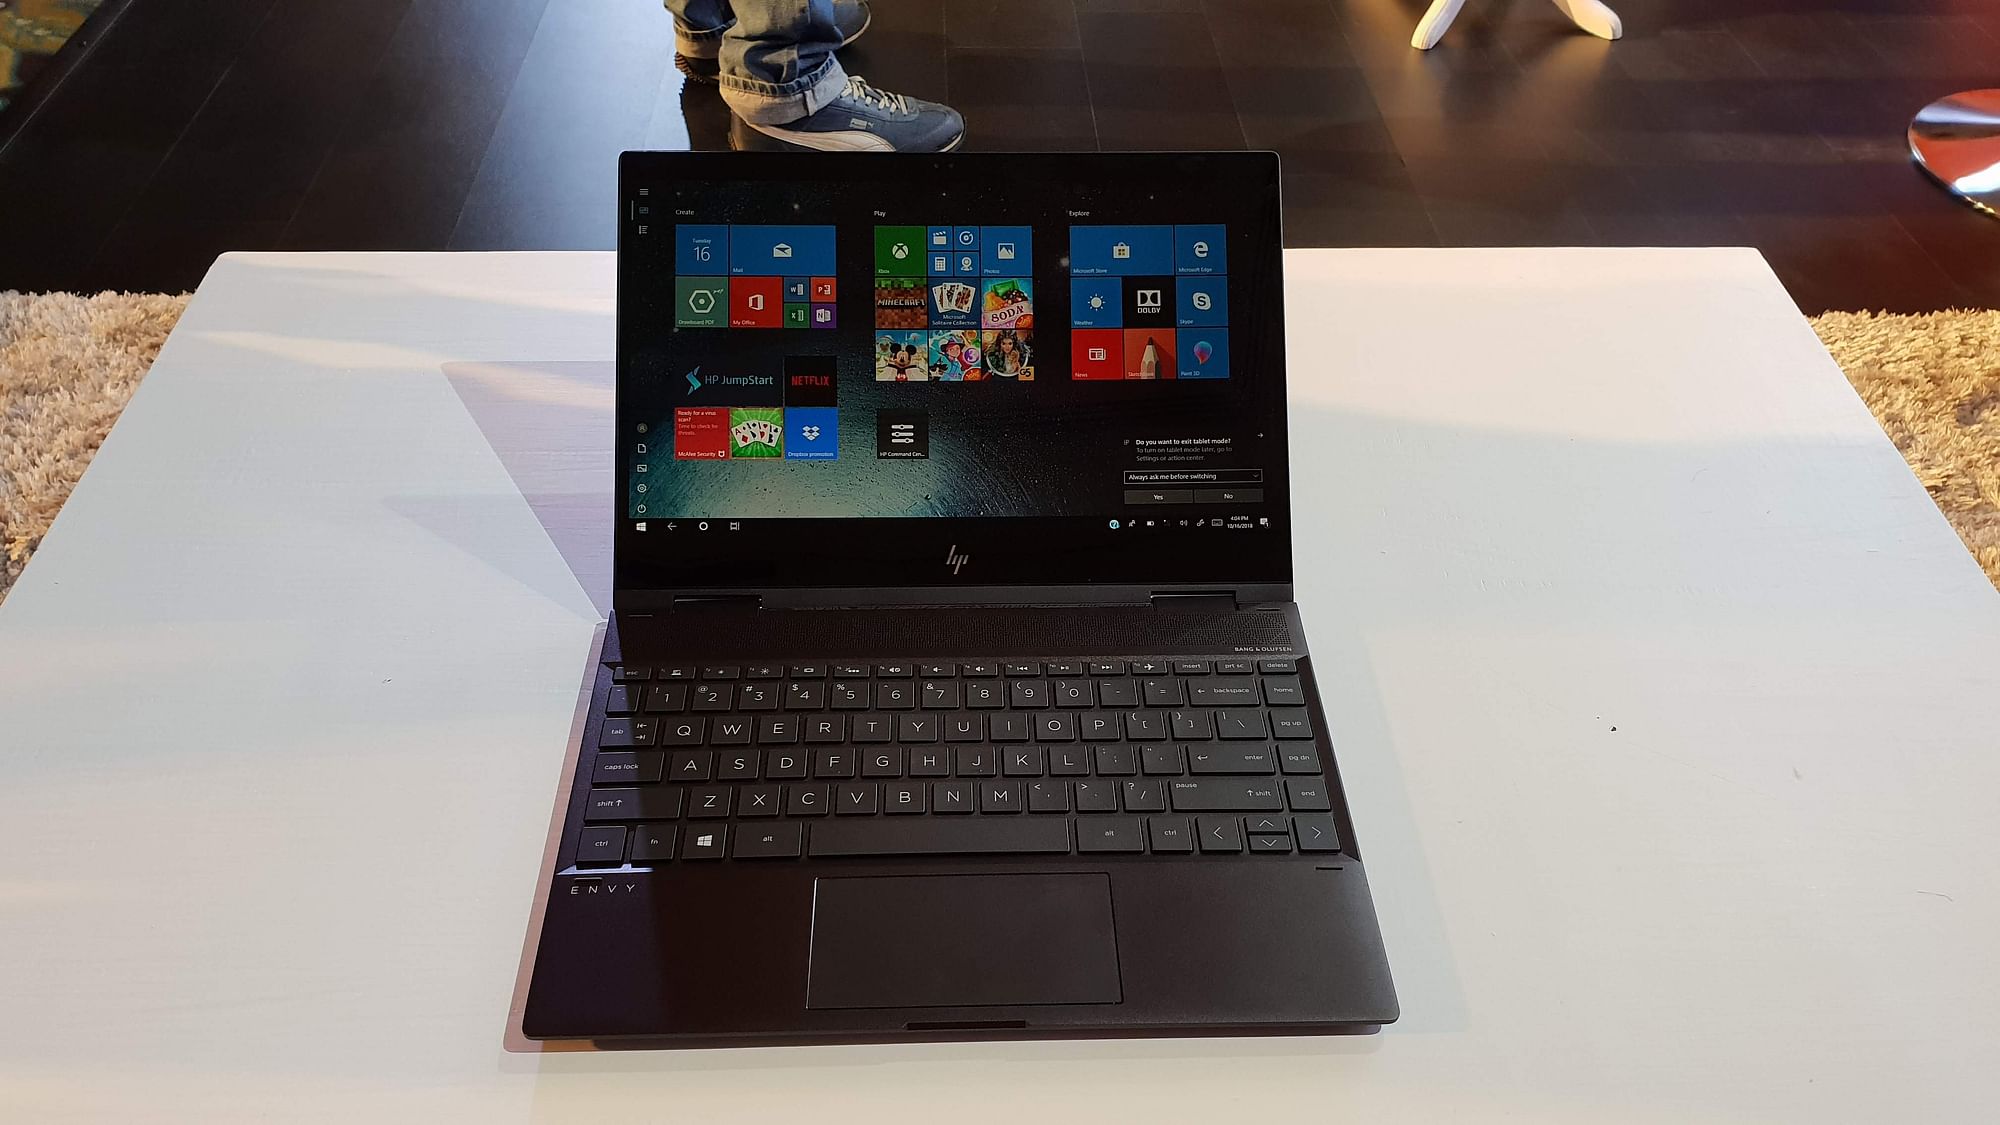 The new HP Envy x360